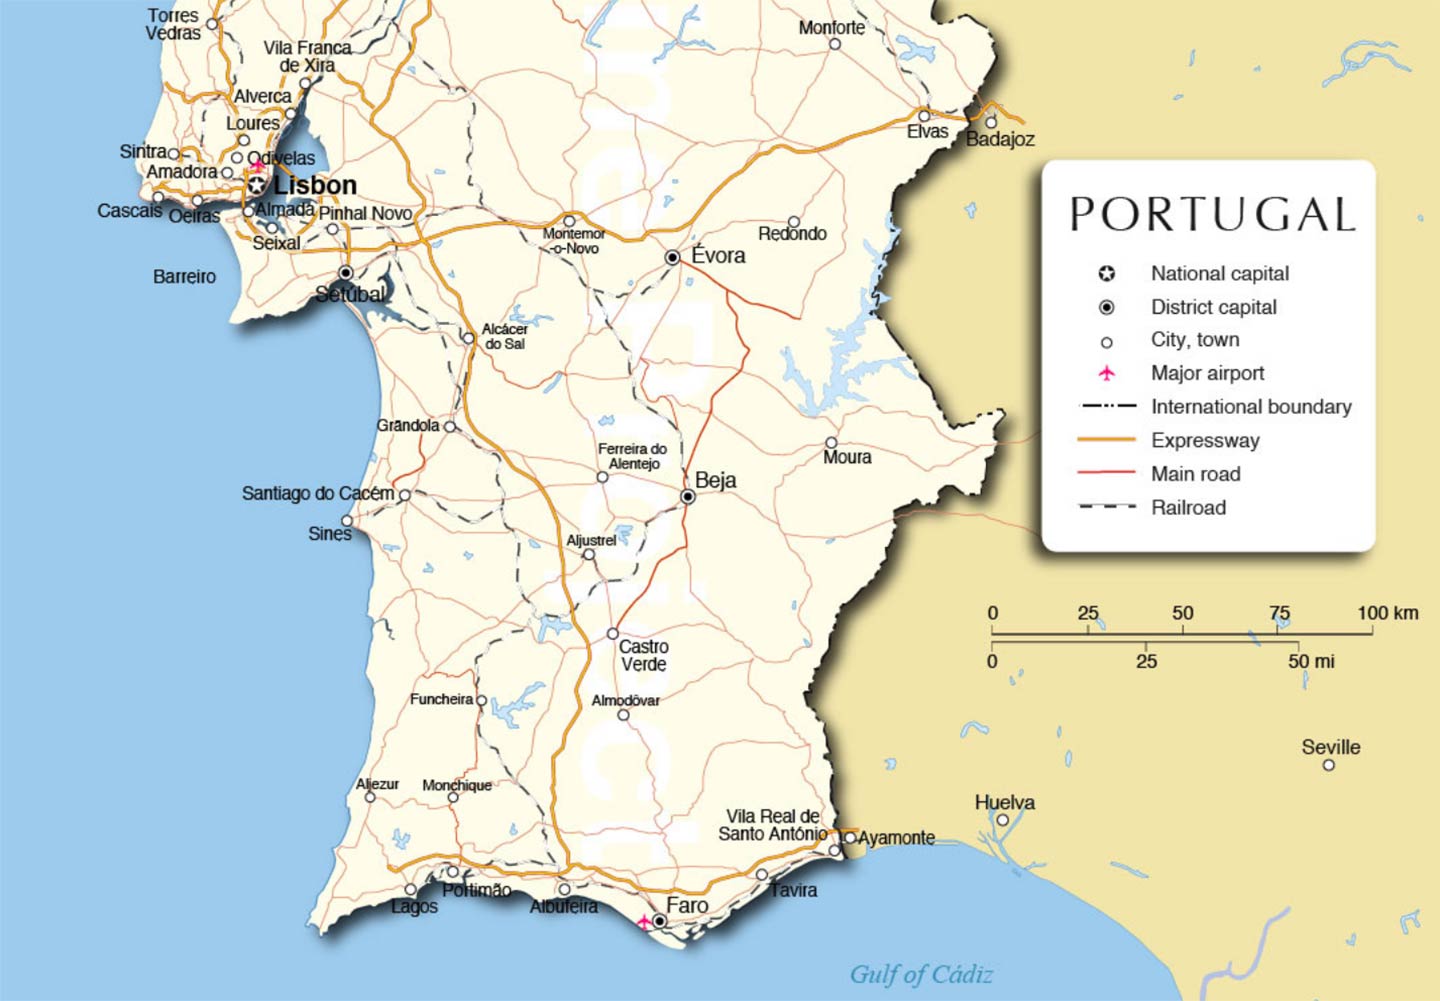 Direct translation (Portuguese to English) of some villages and cities in  Mainland Portugal [OC] : r/MapPorn